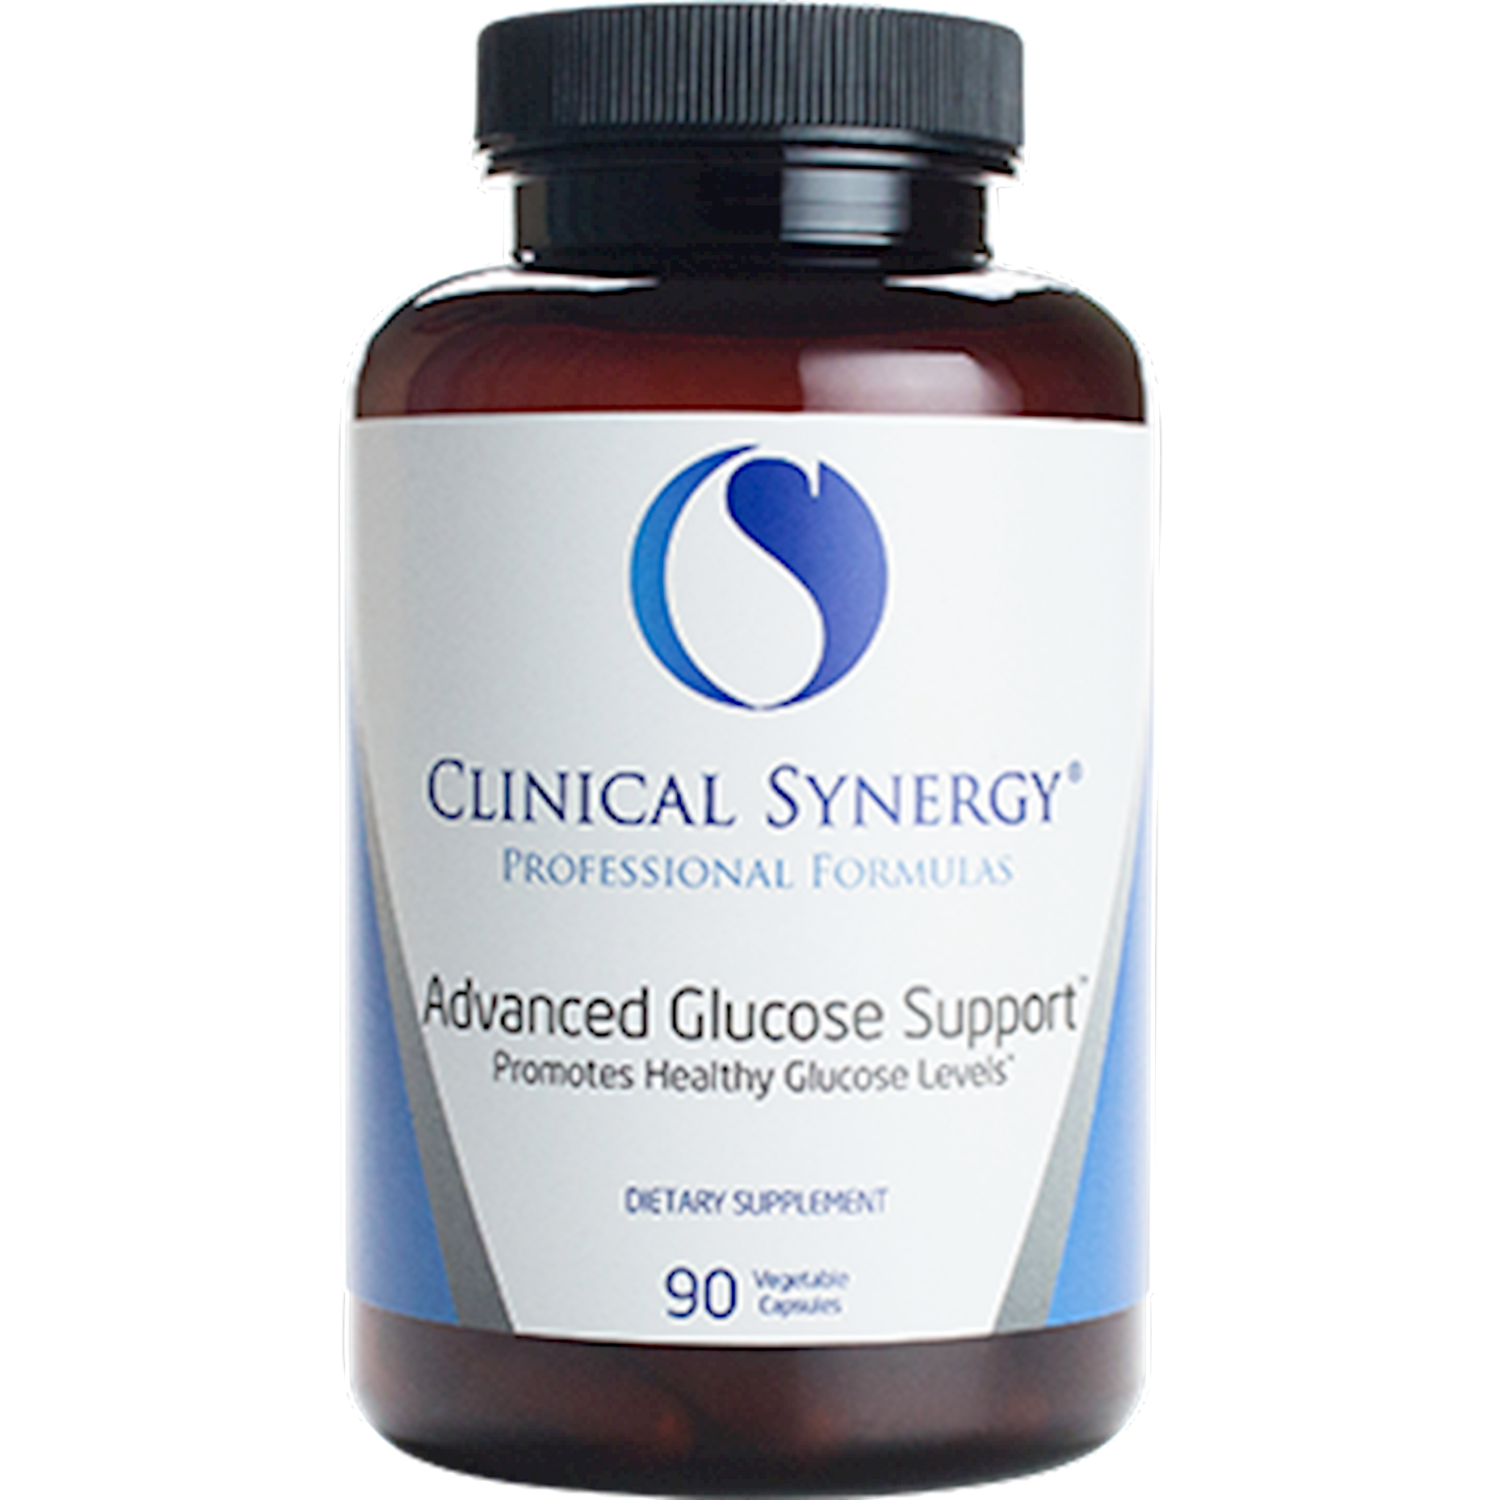 Advanced Glucose Support 90 vegcaps Clinical Synergy